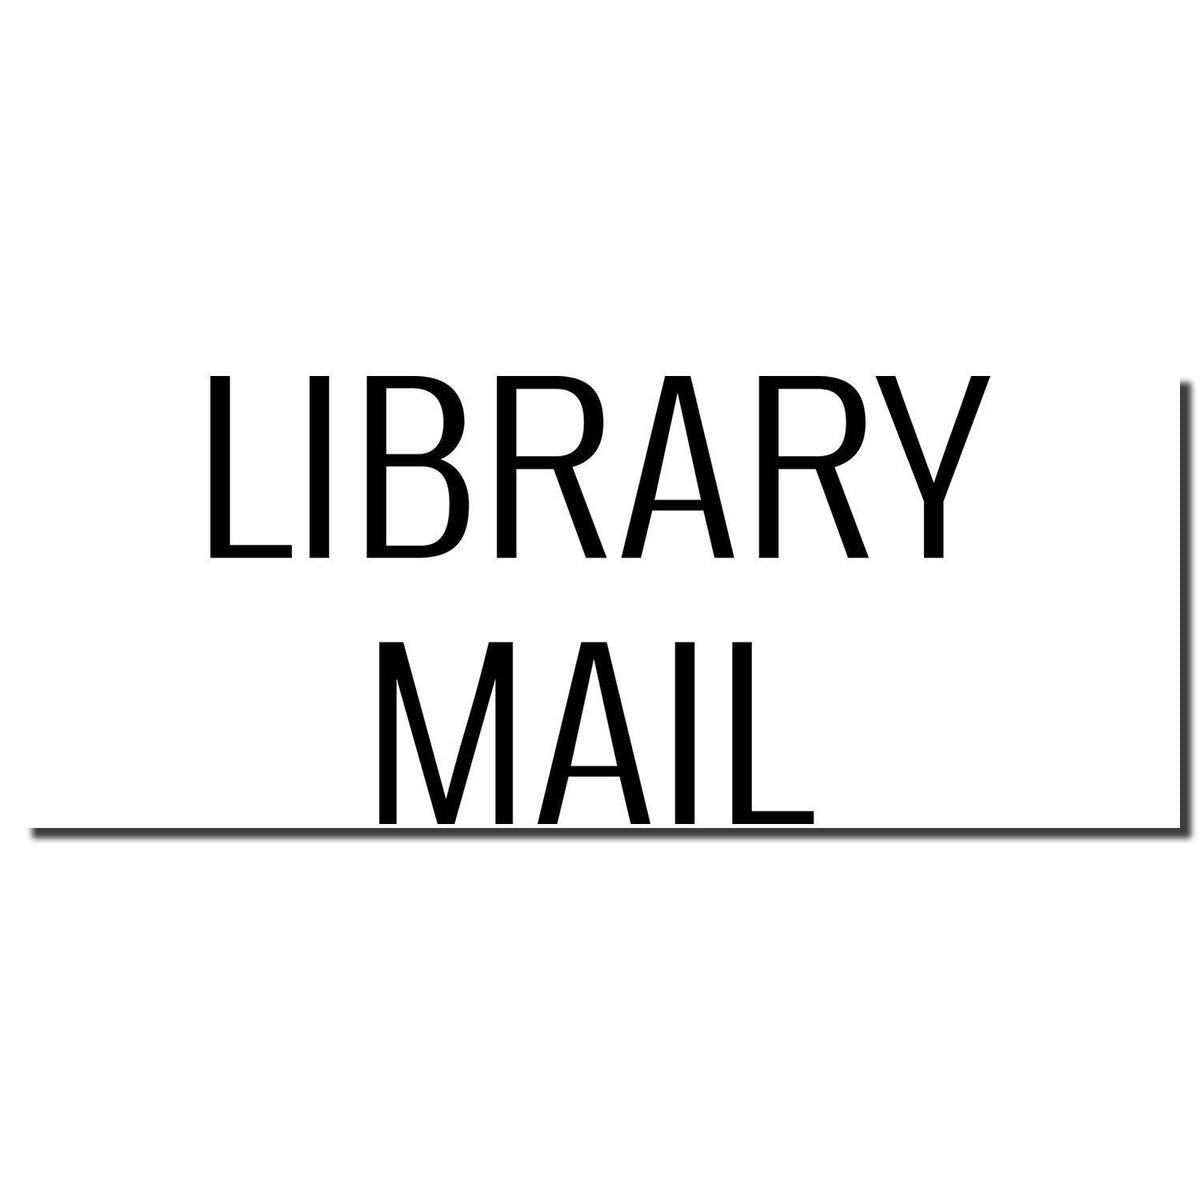 Enlarged Imprint Large Library Mail Rubber Stamp Sample